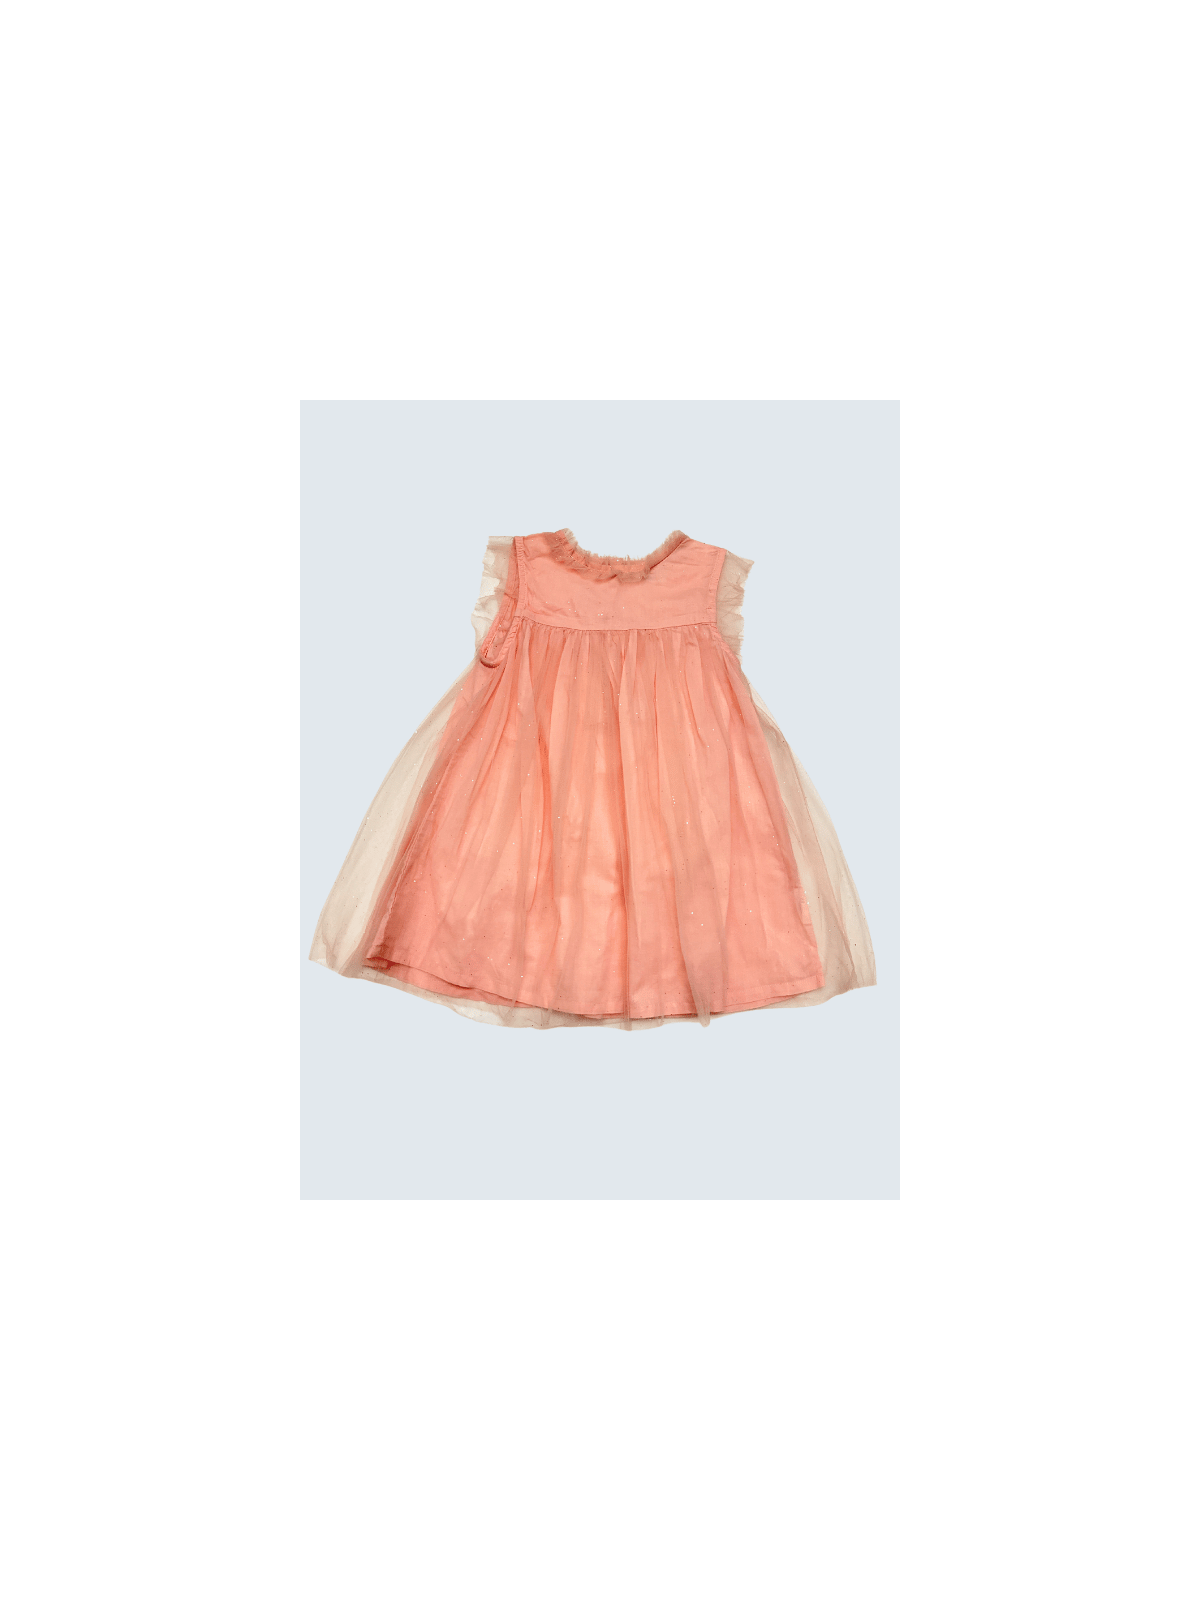 Robe d'occasion Bout'Chou 18 Mois pour fille.